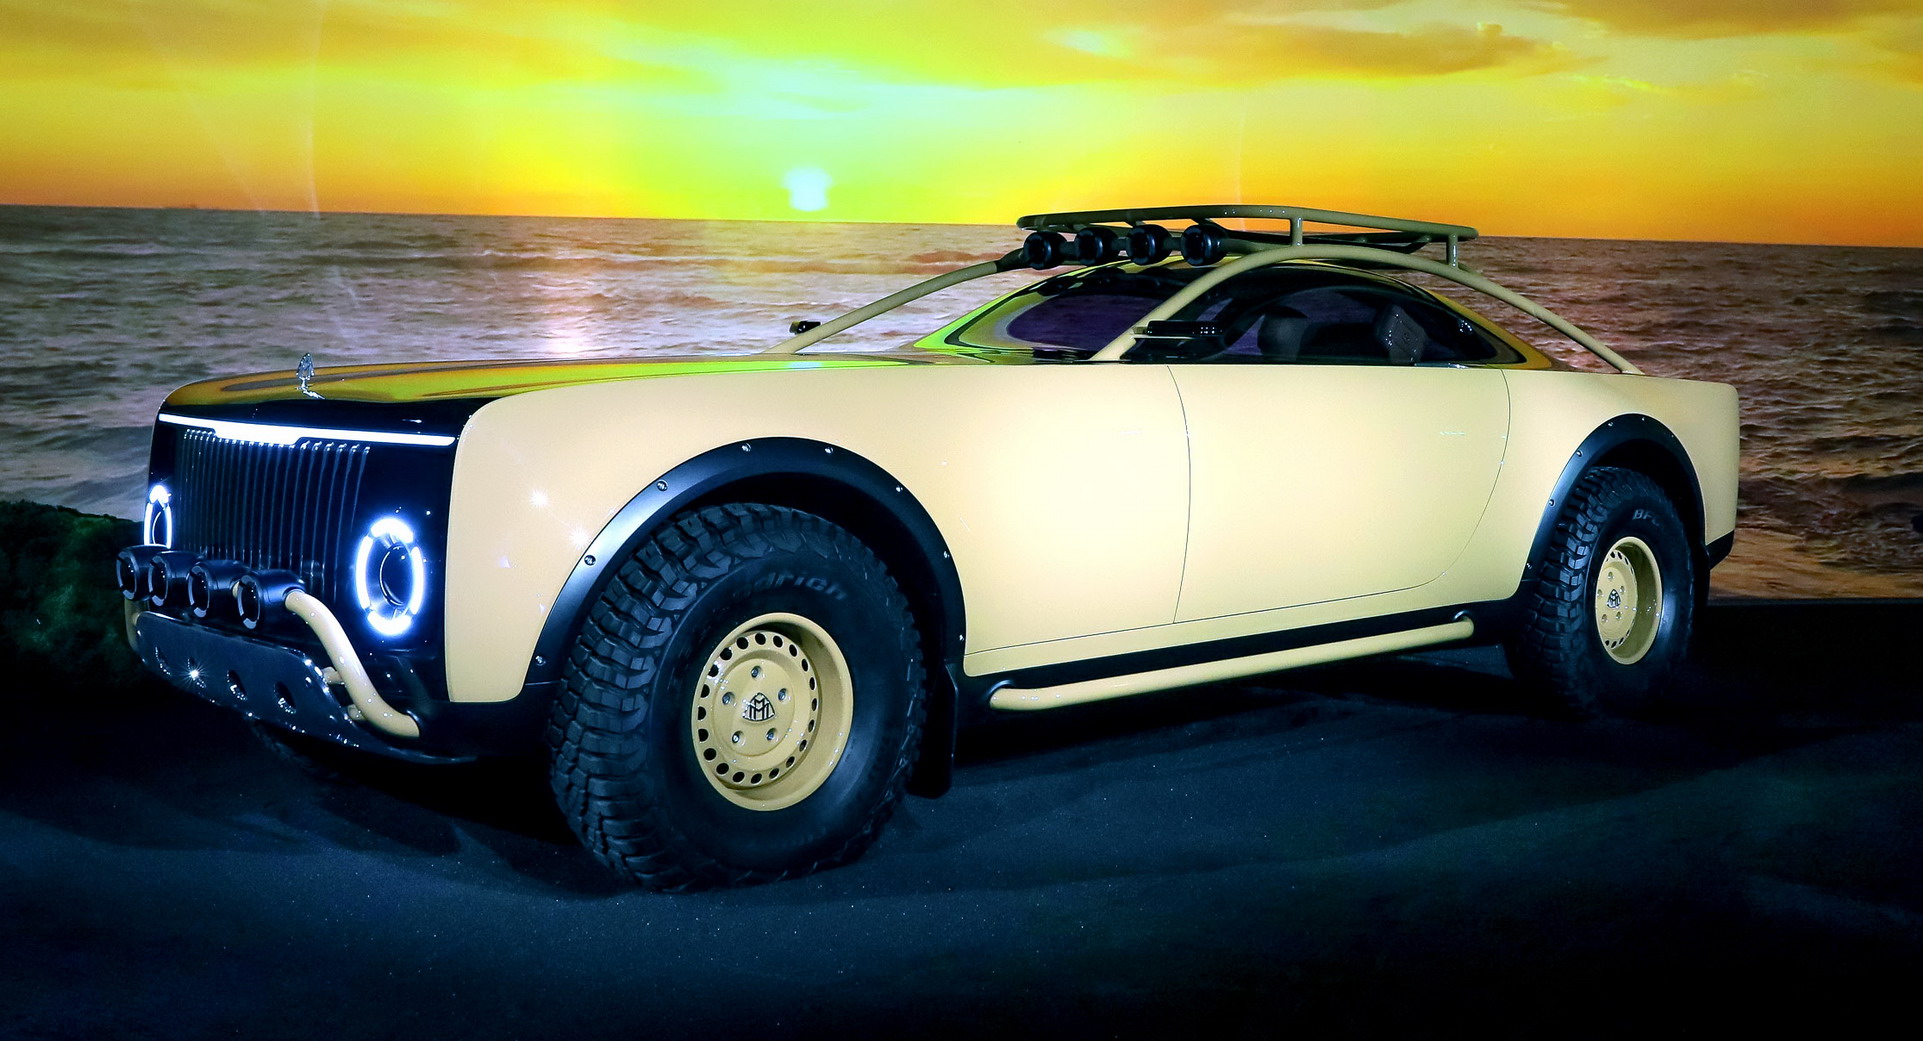 Project Maybach x Virgil Abloh Concept Is A Strange Off-Road Coupe With An  External Roll Cage